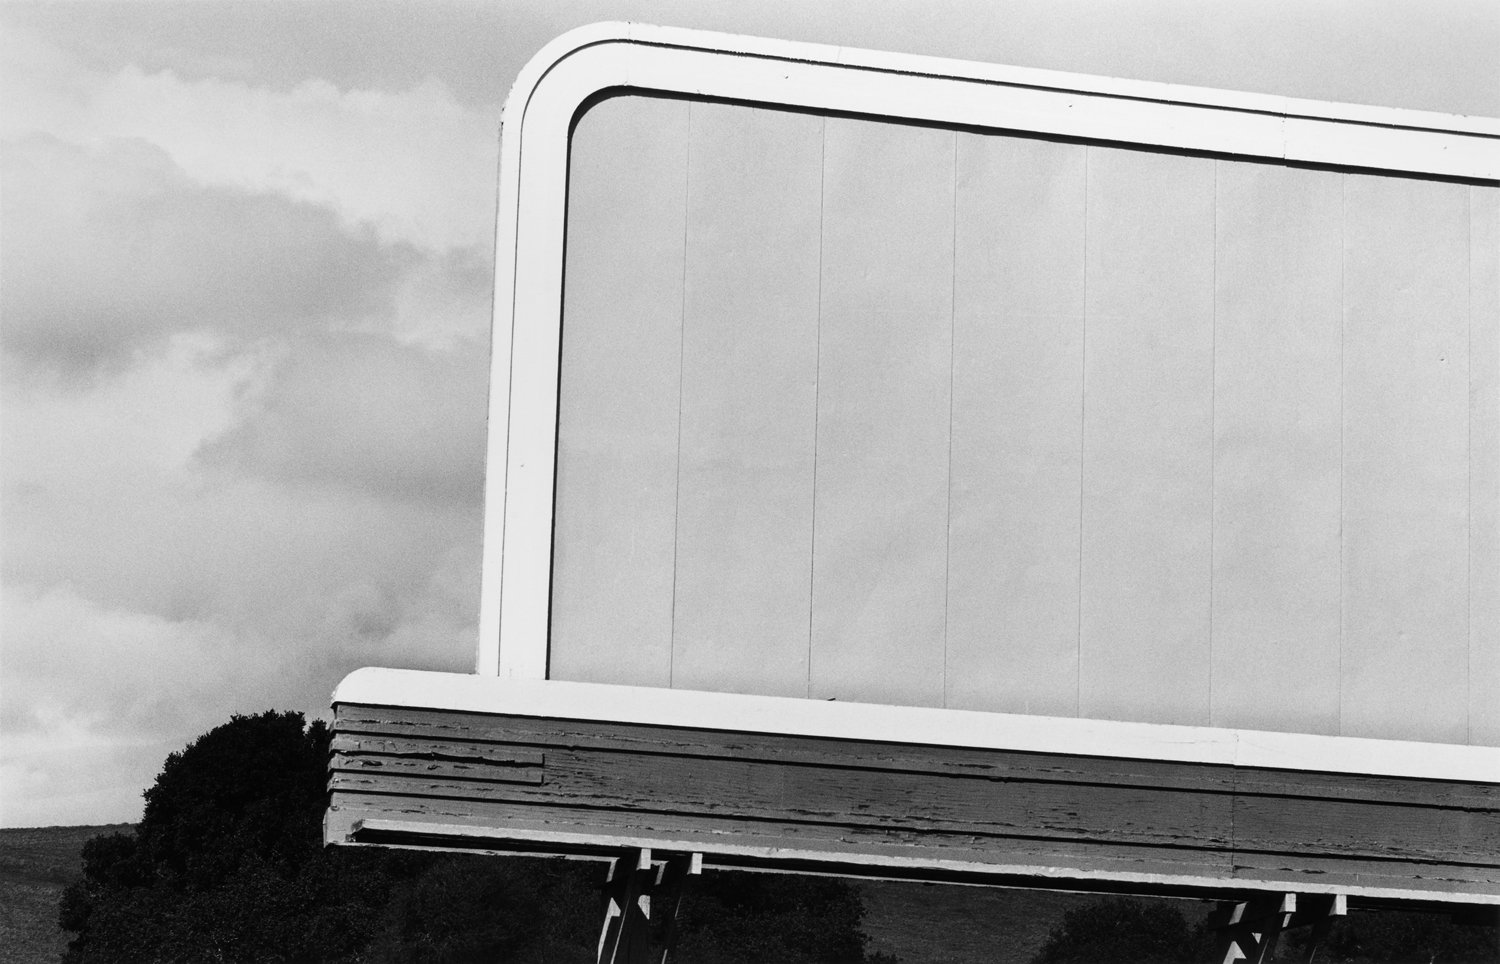  Lewis Baltz,  Gilroy,  1969. Courtesy of the Pilara Family Foundation Collection and Sotheby’s.&nbsp; 